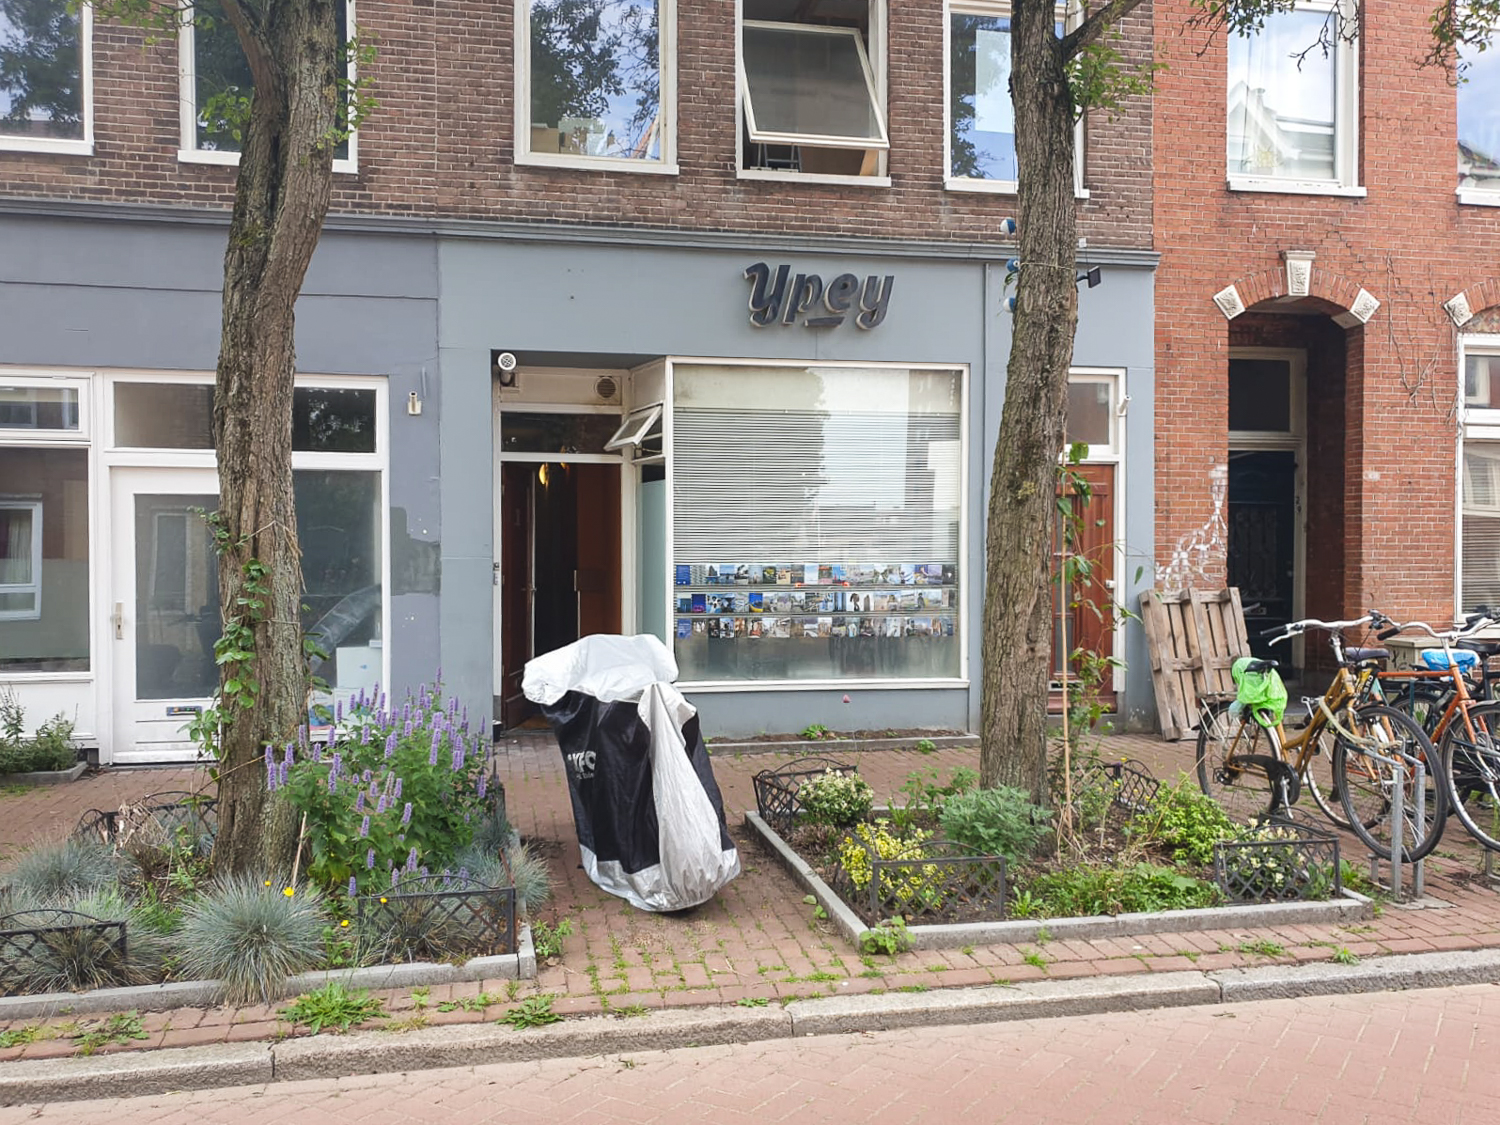 Exhibition of postcards displayed in a large window on a street in Groningen, The Netherlands, with 'a sign reading 'Ypey' above, trees and plants in the pathway in front.